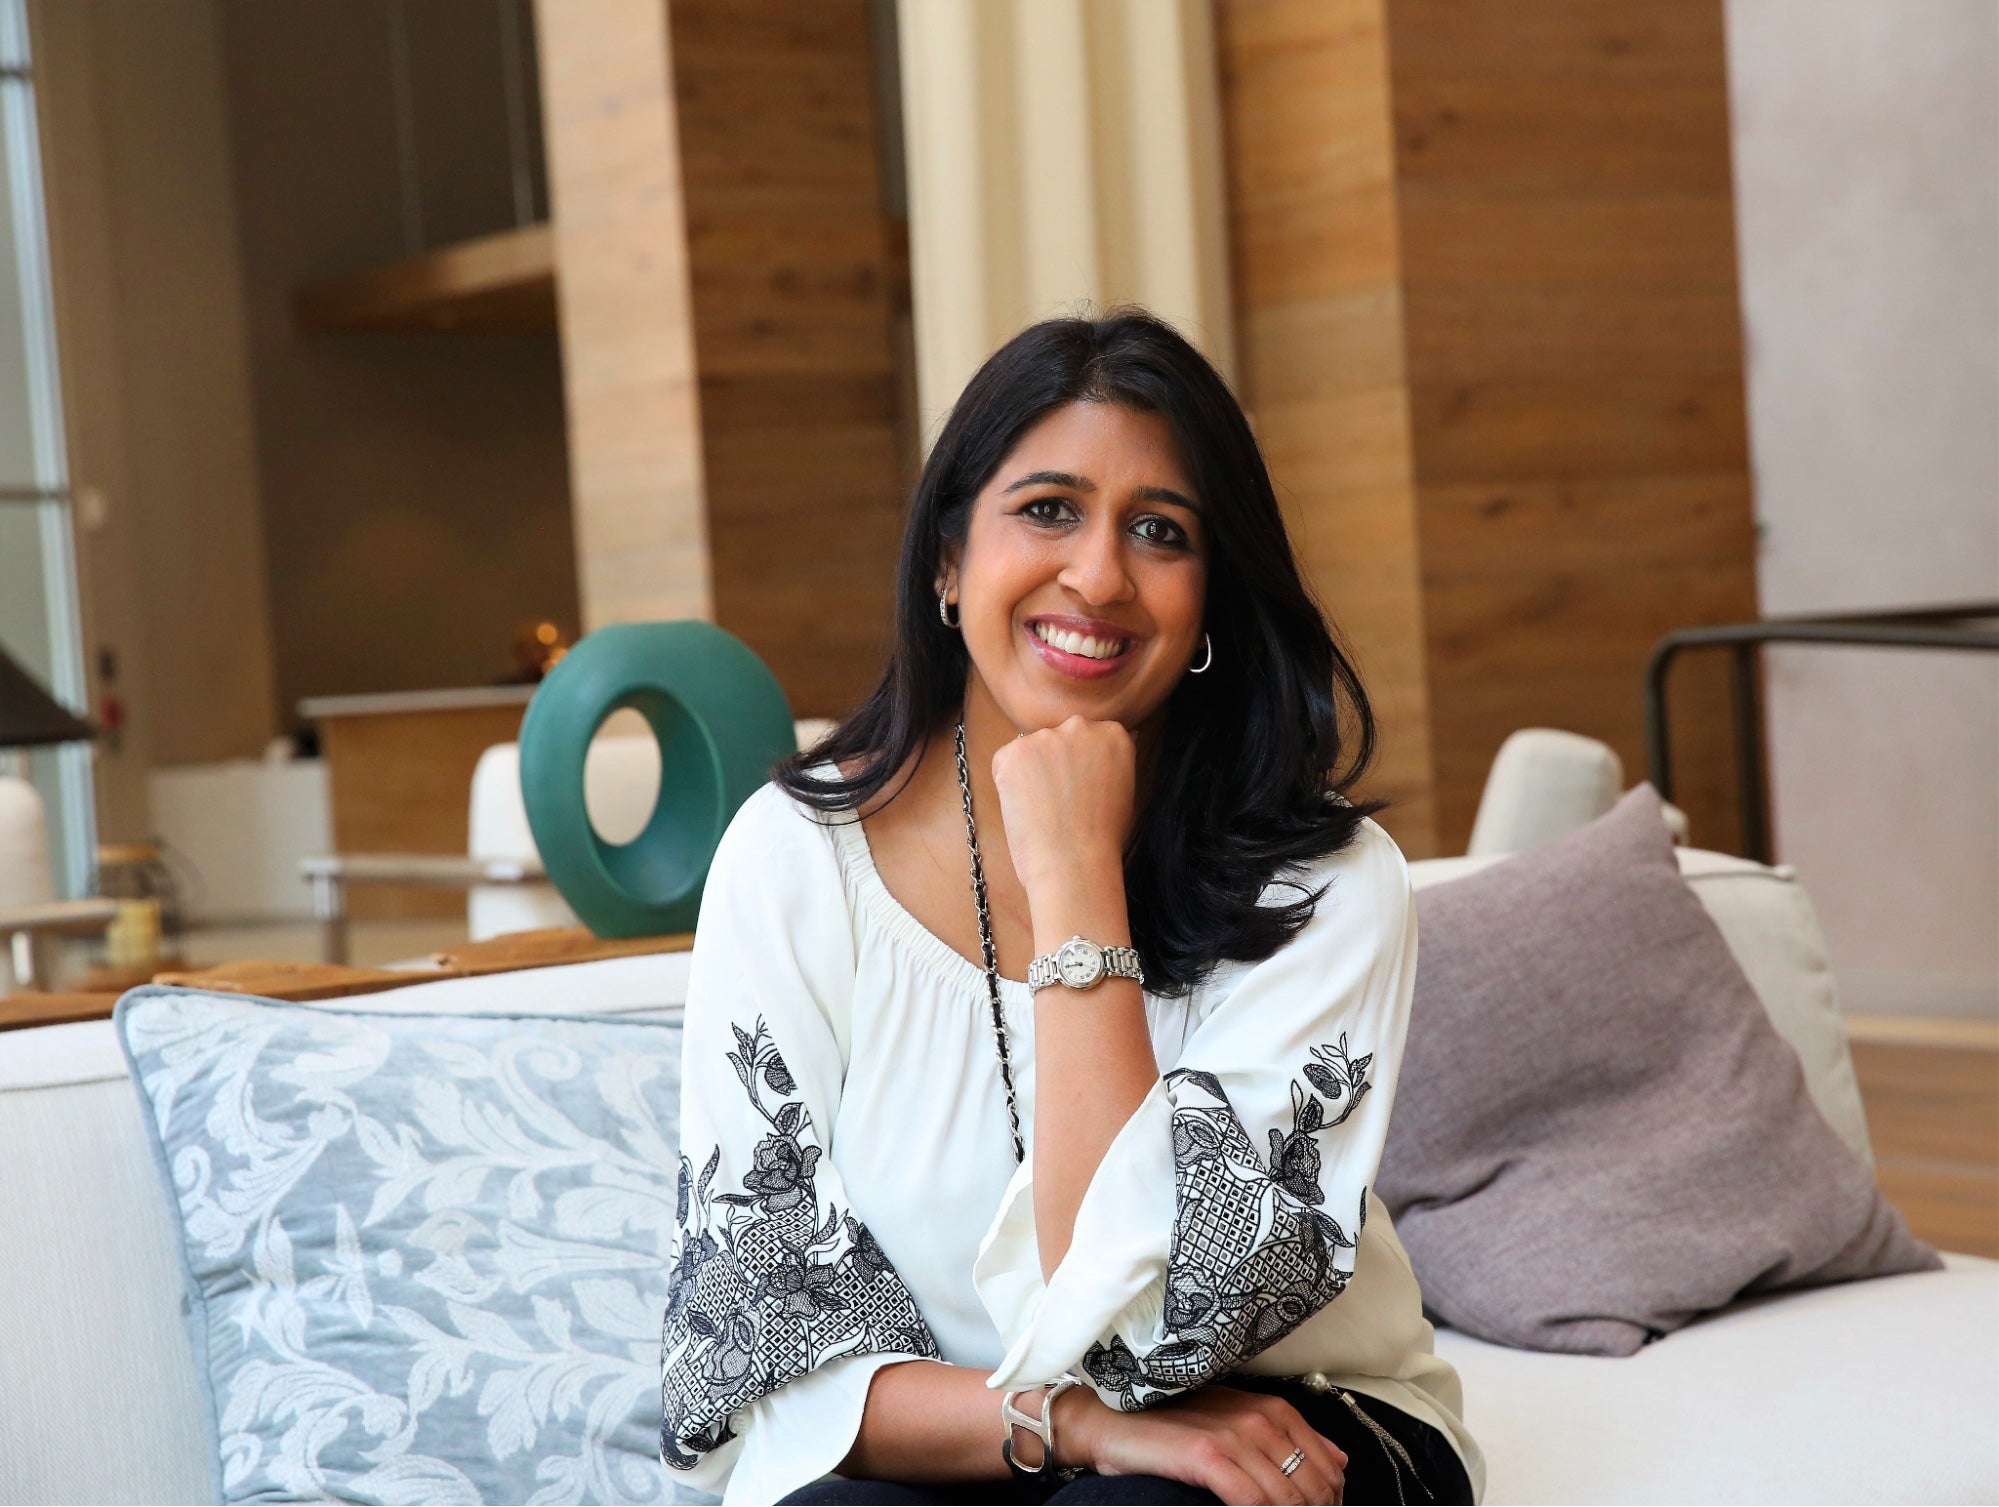 Amy Divaraniya, the founder of OOVA in a living room setting